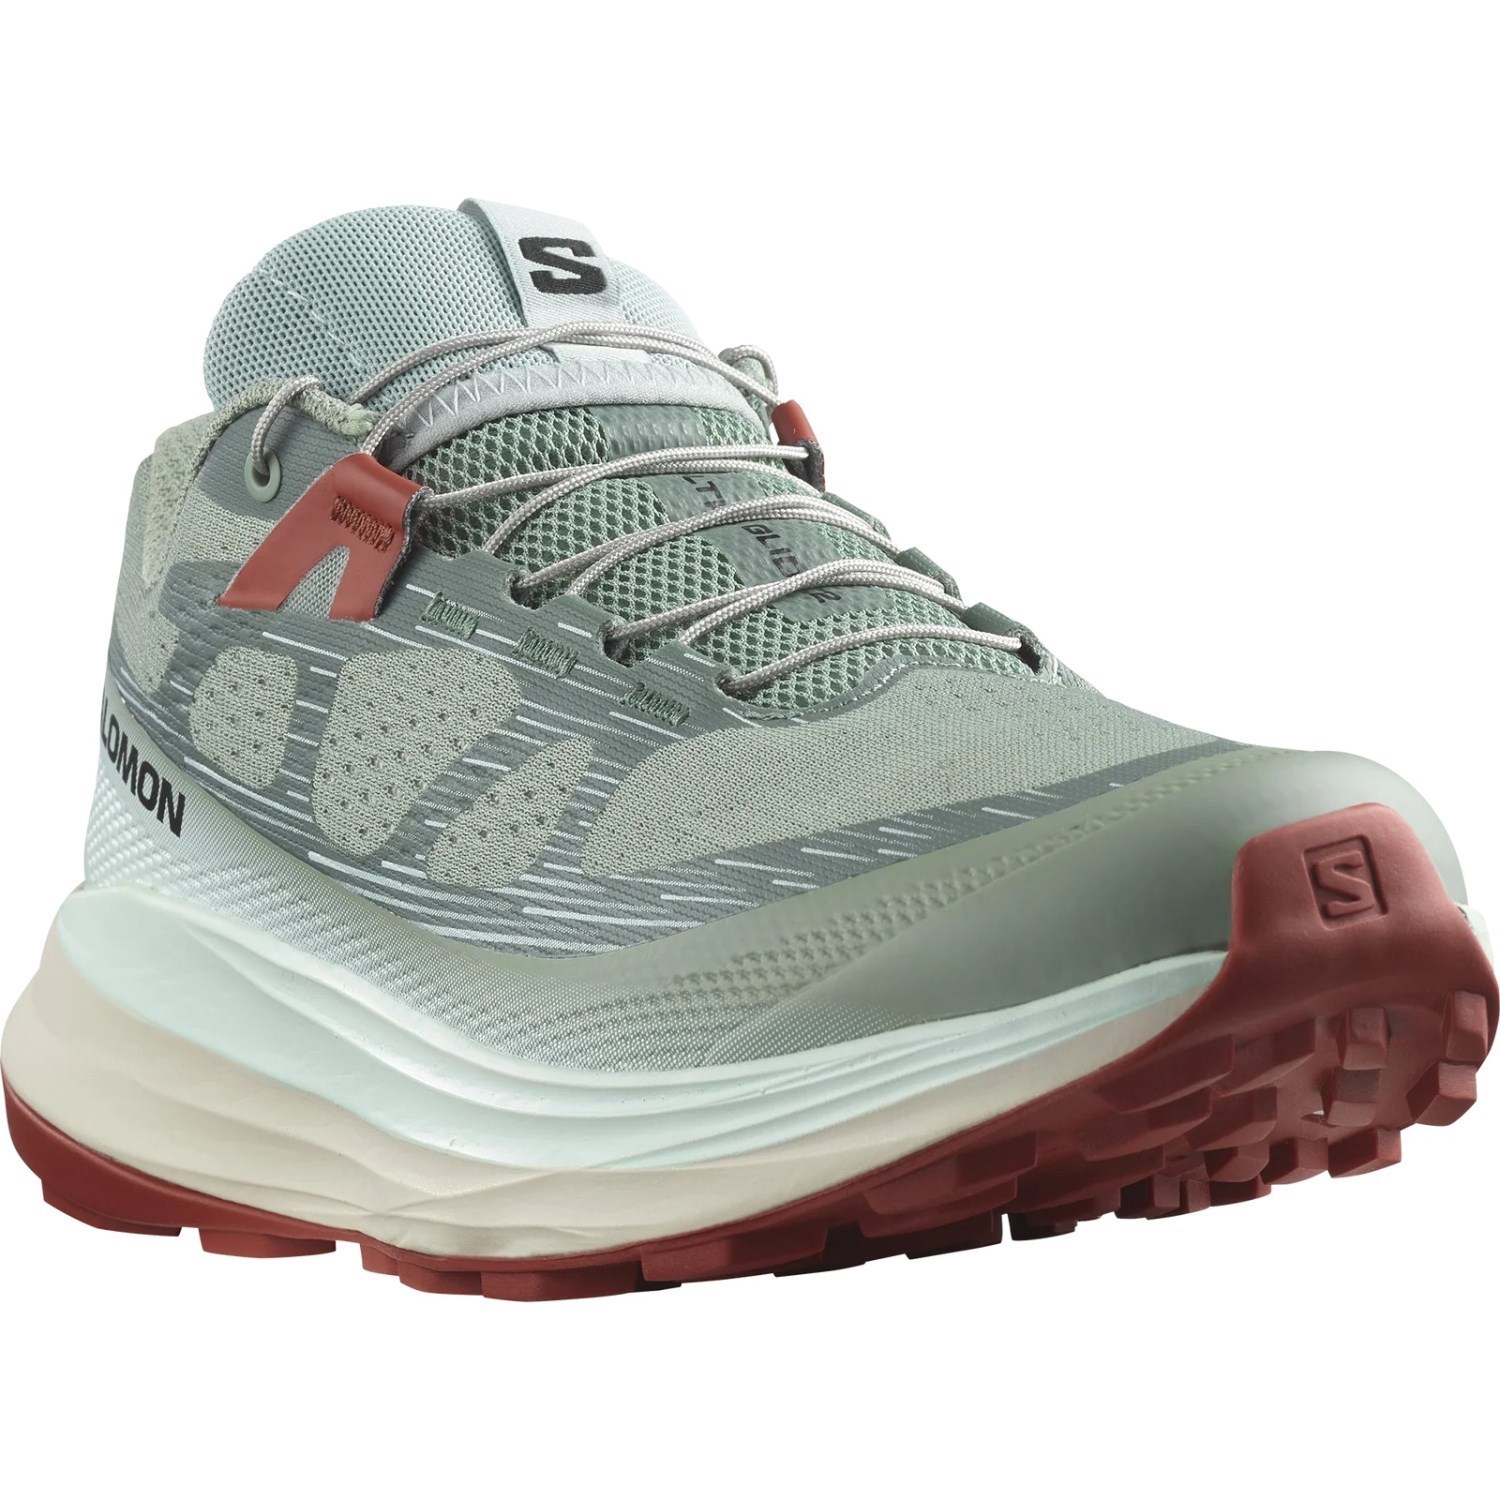 Salomon Ultra Glide 2 - Womens Trail Running Shoes - Lily Pad/Bleached ...